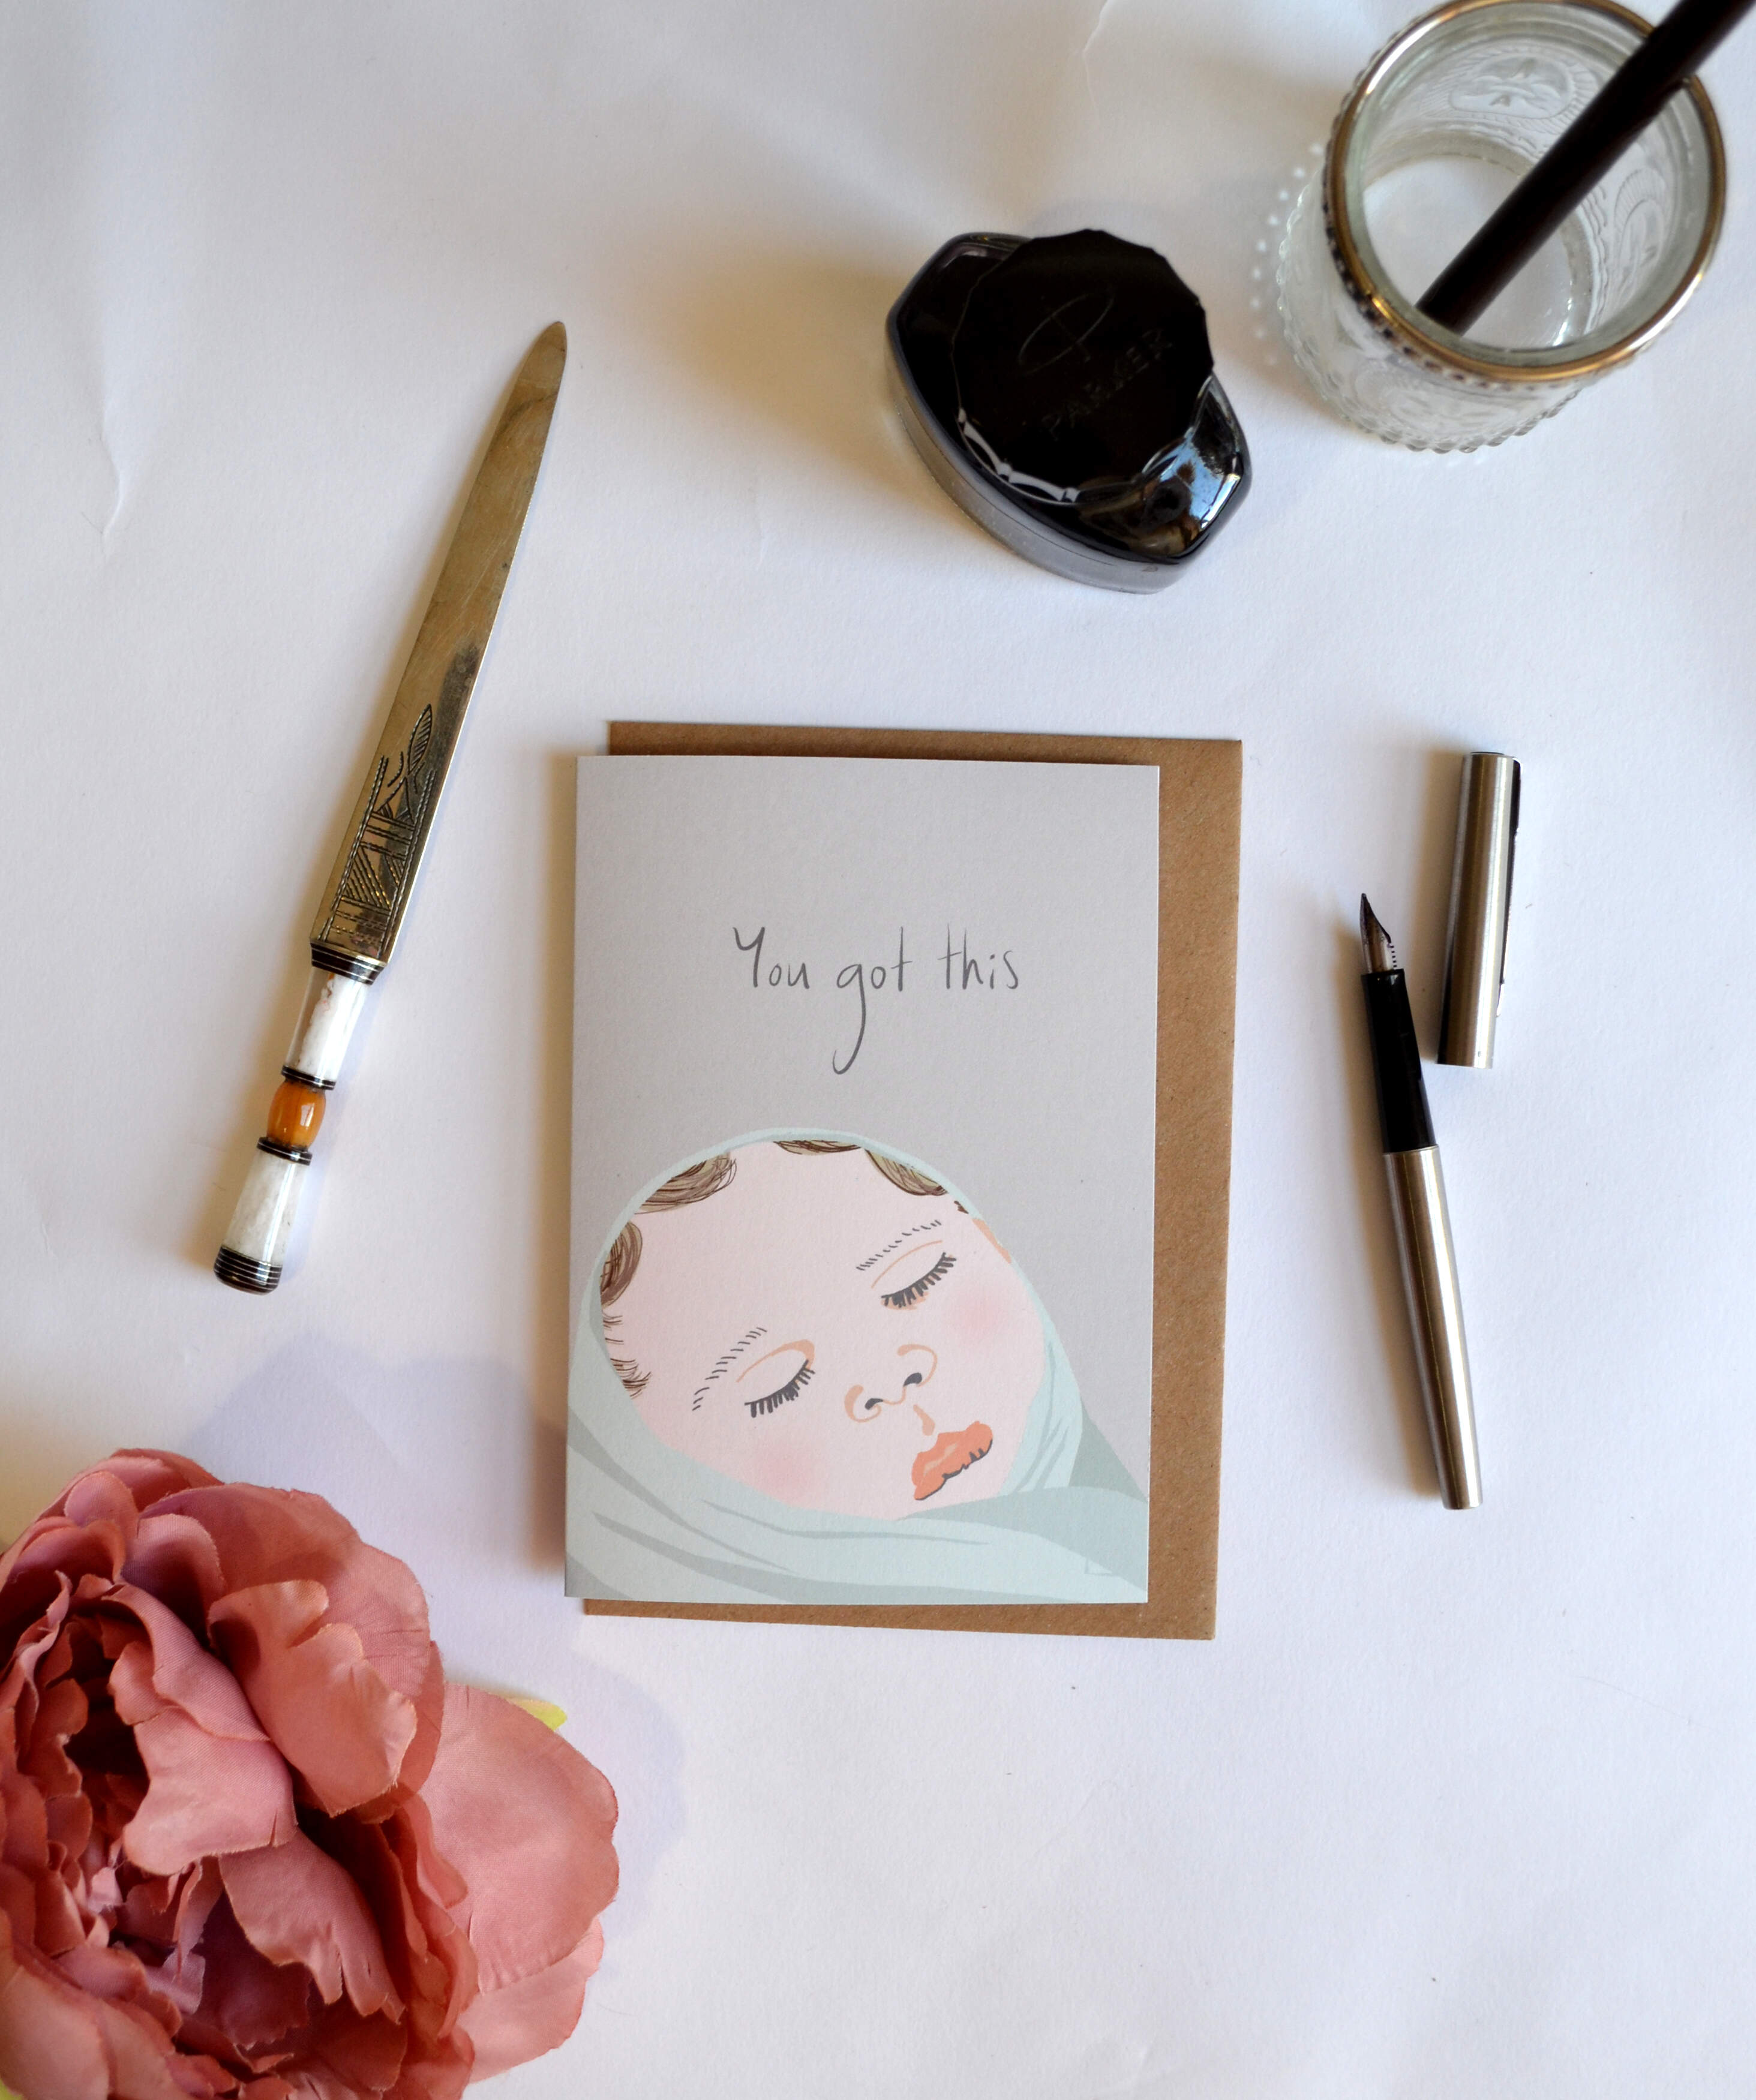 You got this, New Baby greetings card